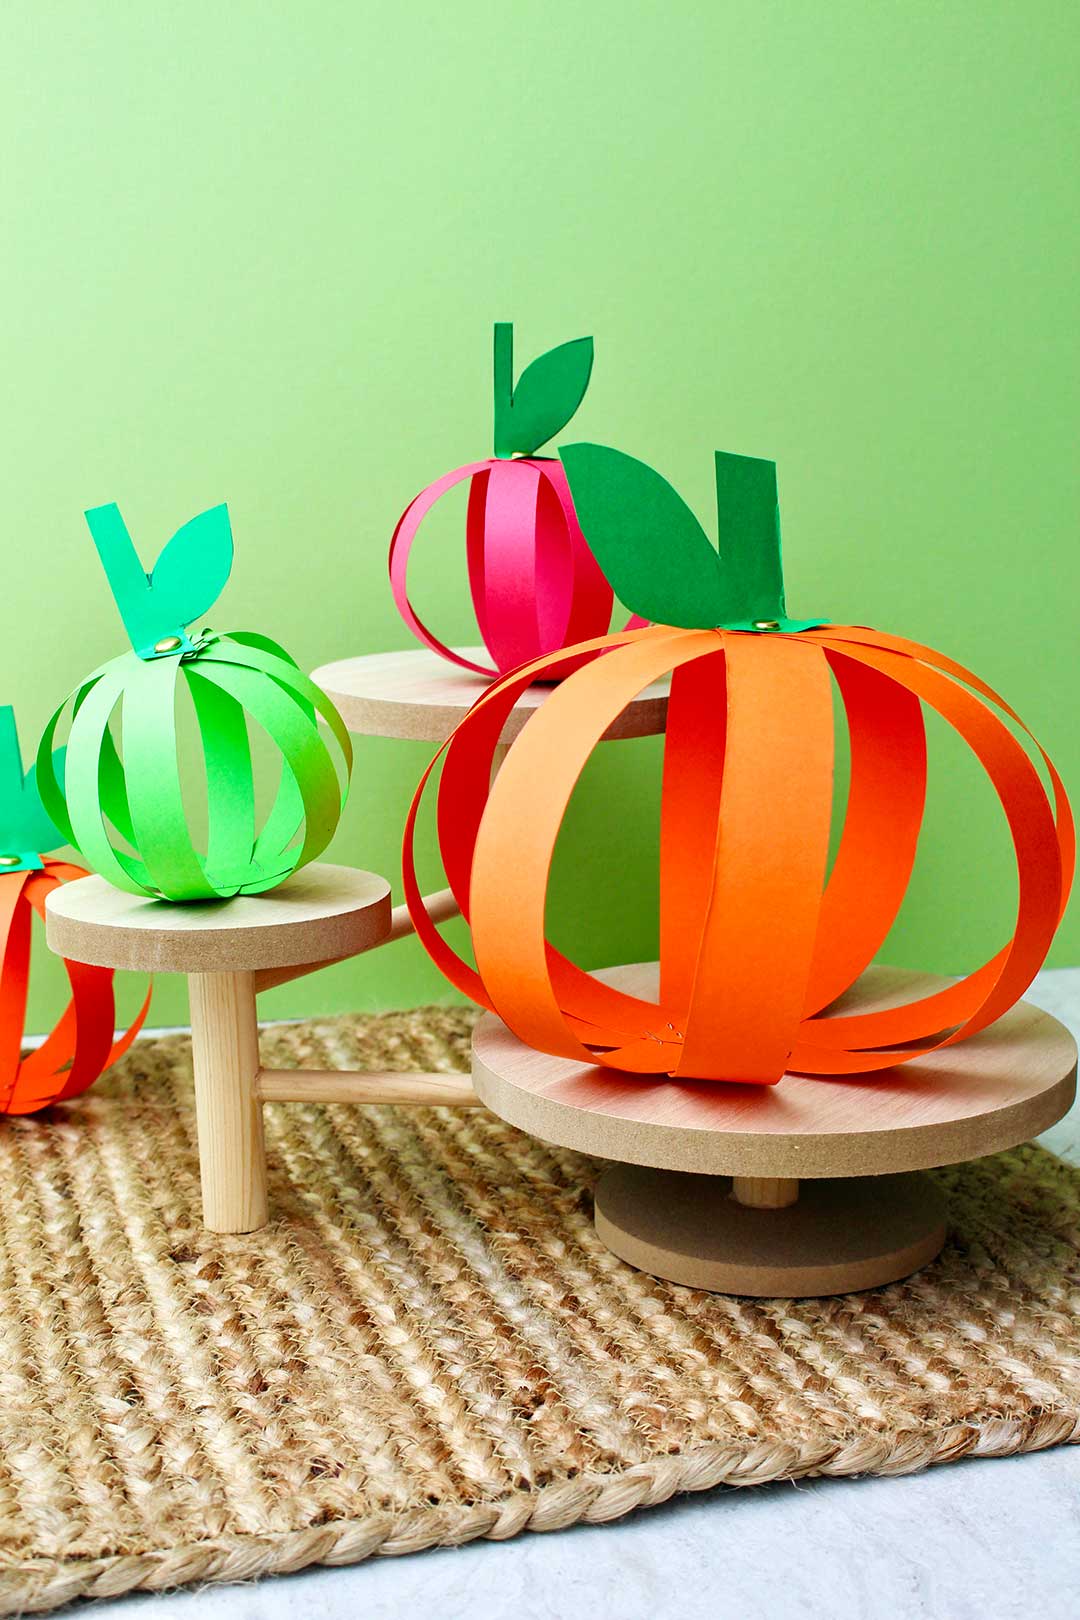 Vertical image of four completed paper strip pumpkins sitting on wooden pedestals against a green background.